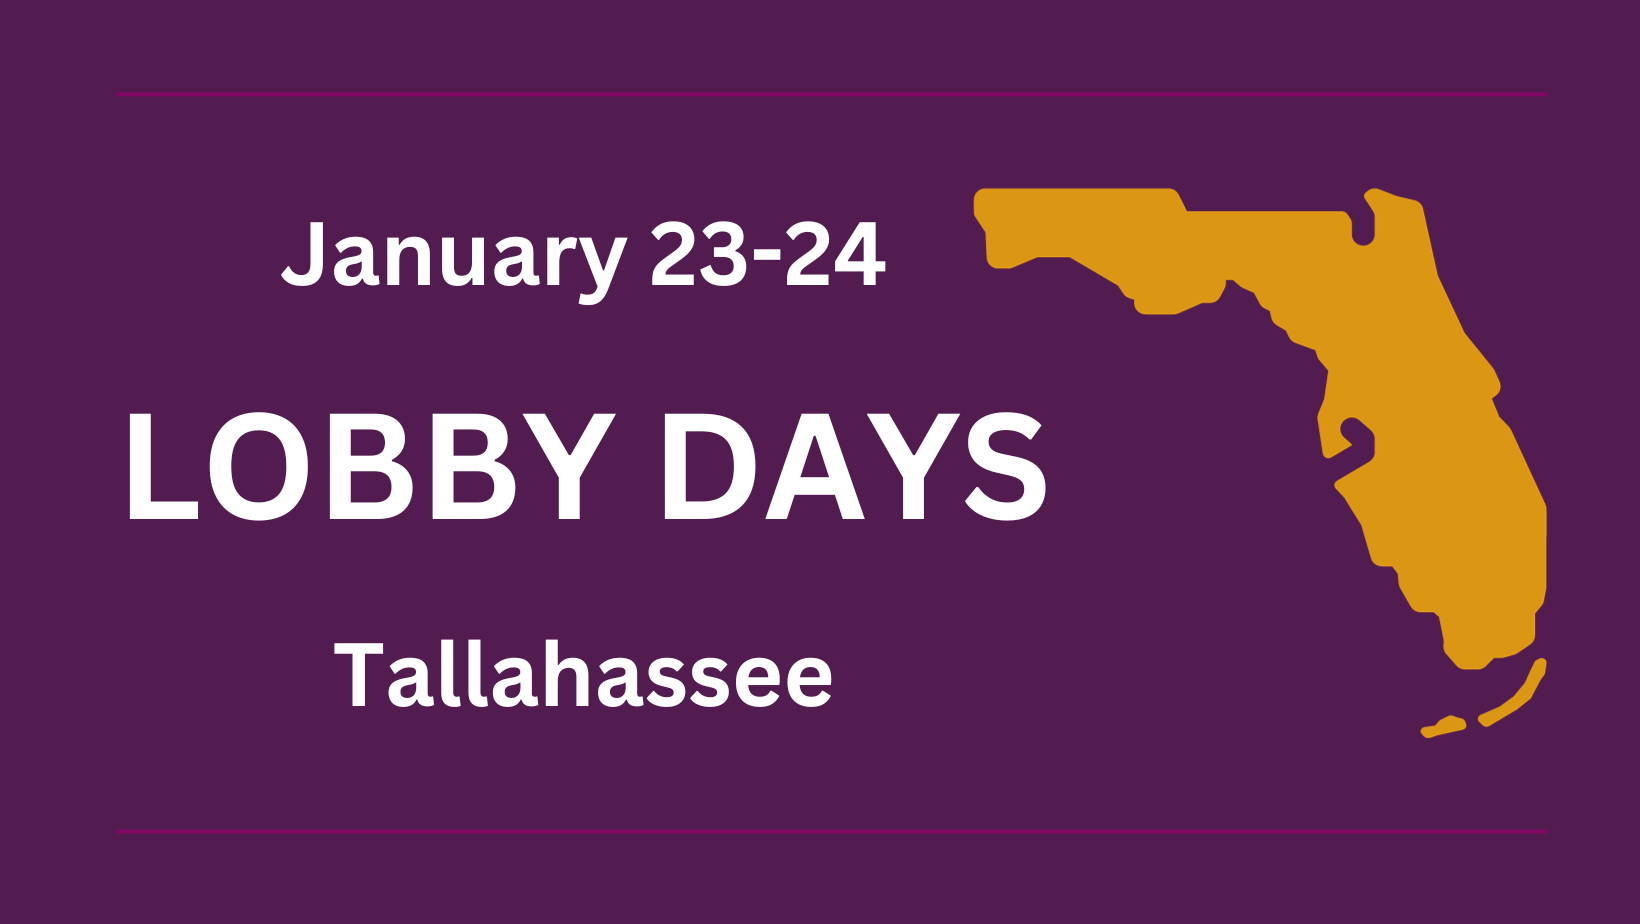 Lobby Days January 23-24 Tallahassee text on a Purple background with a Gold State of Florida graphic